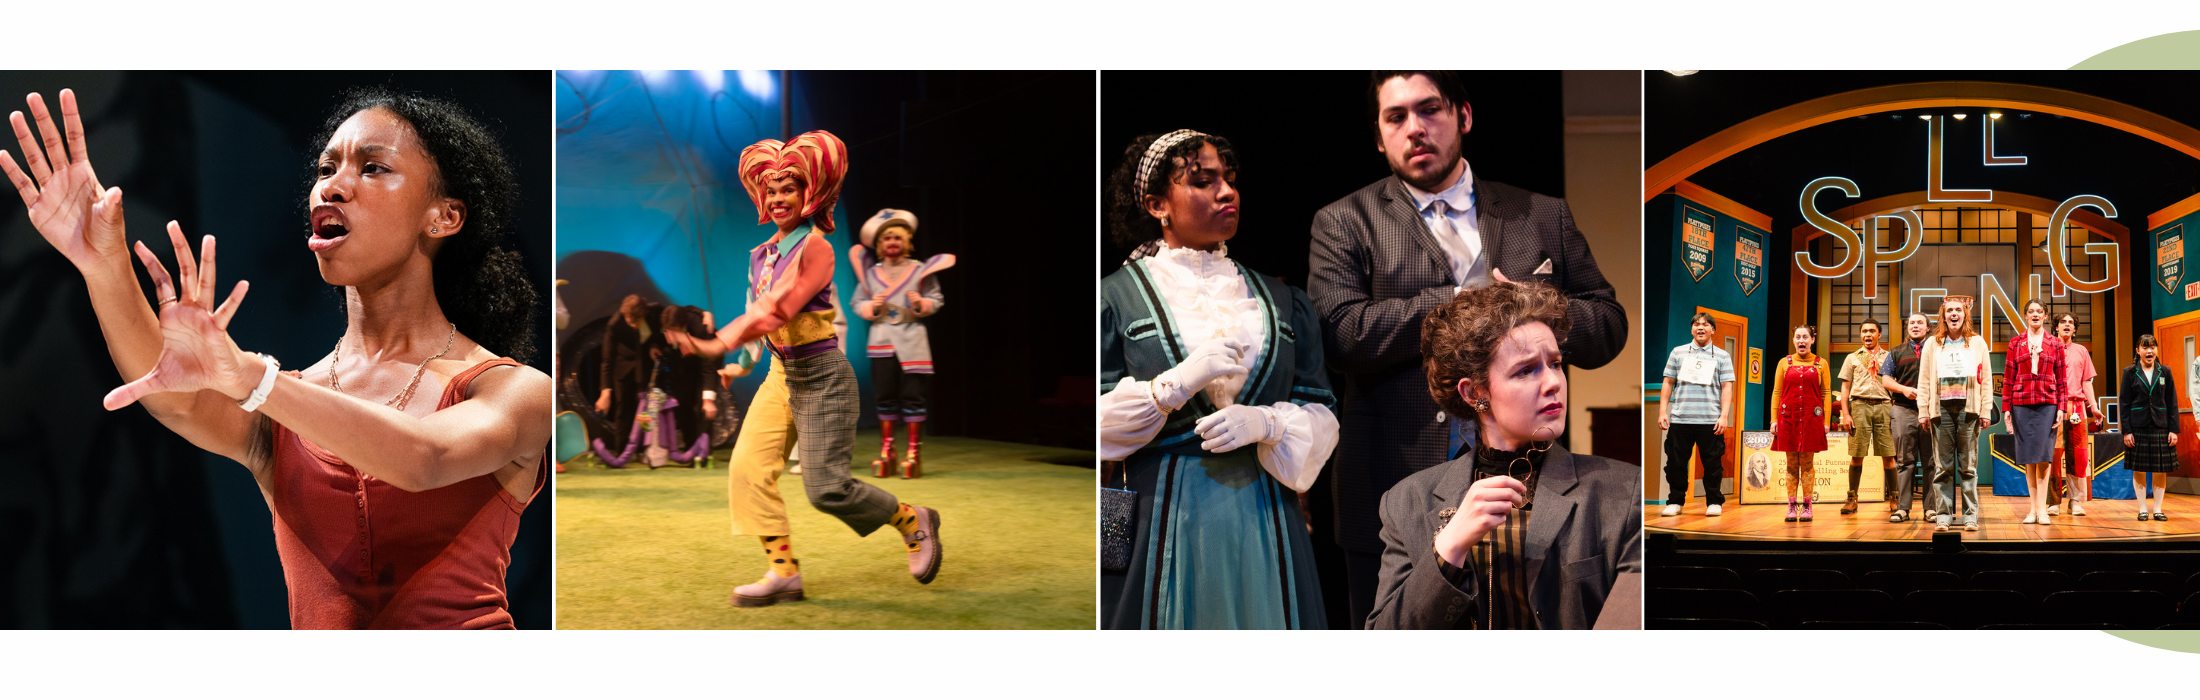 show photos from 2023-24. A young woman reaches forward grasping for understanding; a clownish woman runs across the stage; three characters in Edwardian clothing look shocked; spelling bee contestants sing the finale.